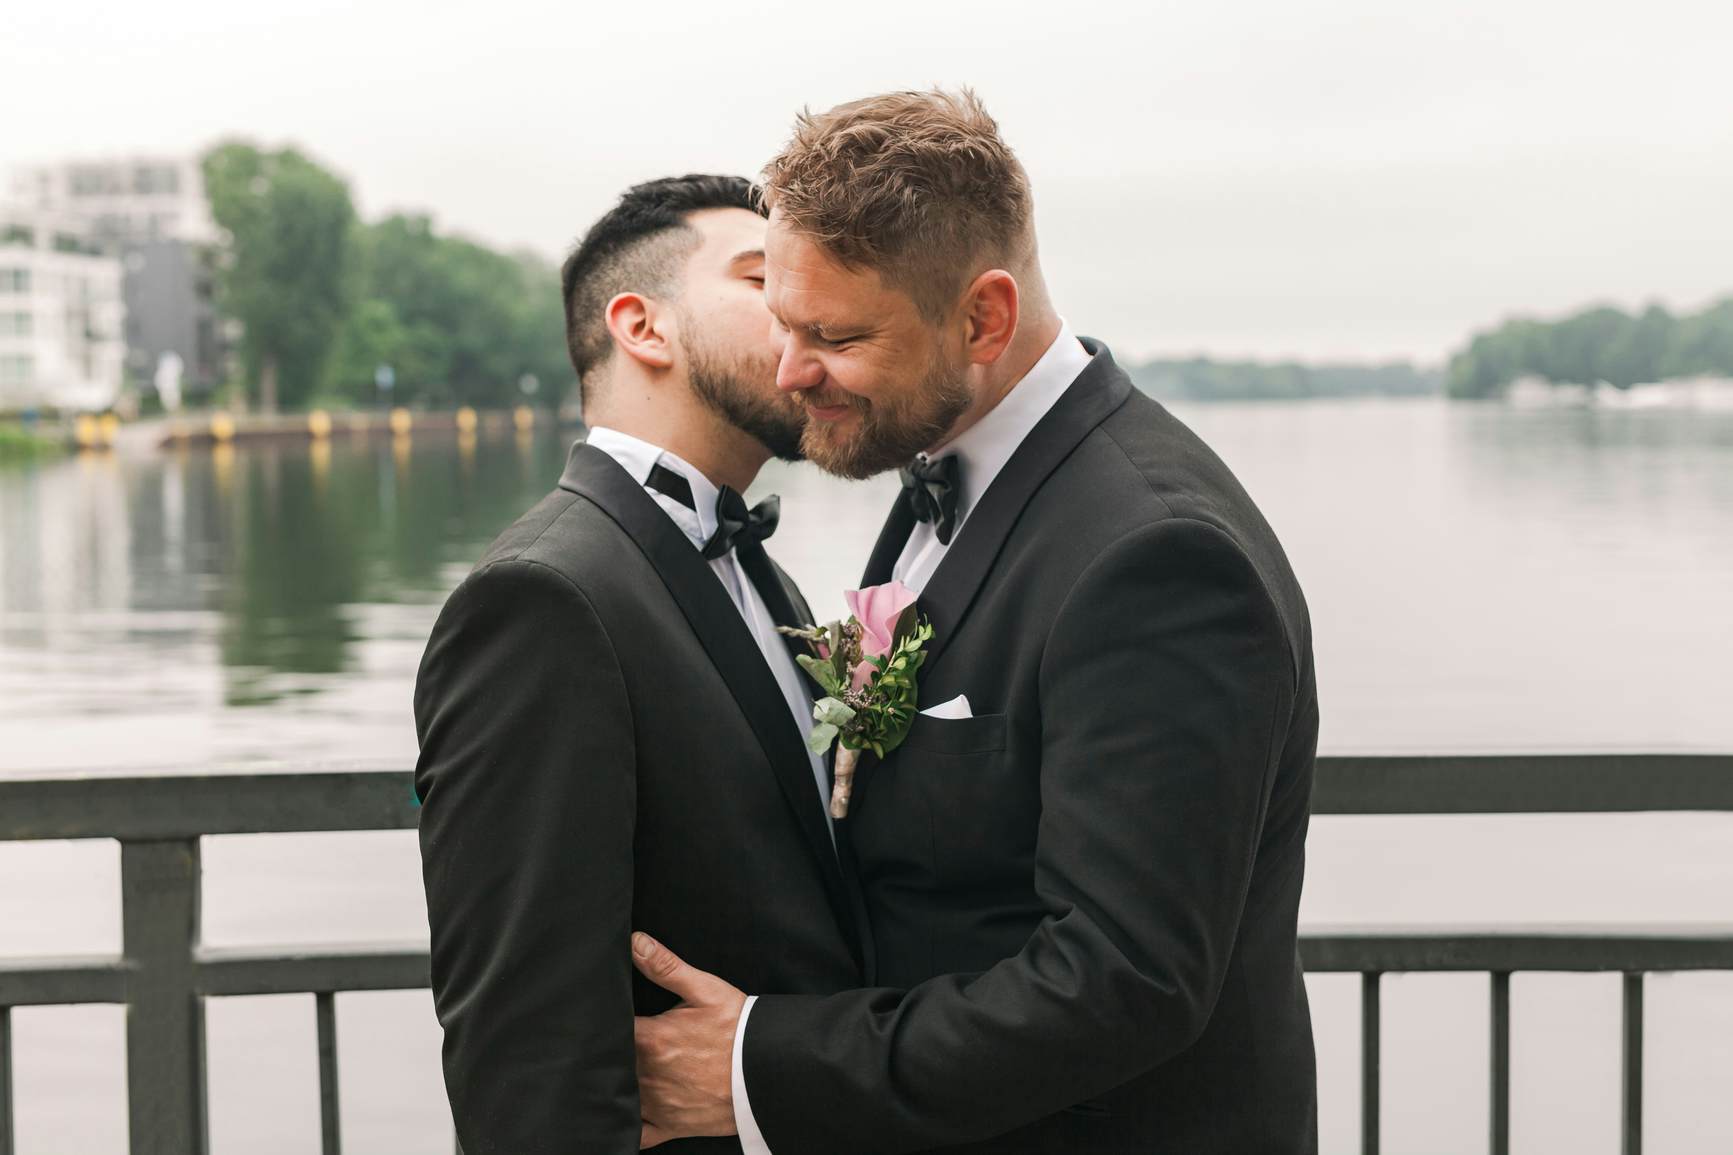 Planning a same sex marriage in Switzerland - all you need to know